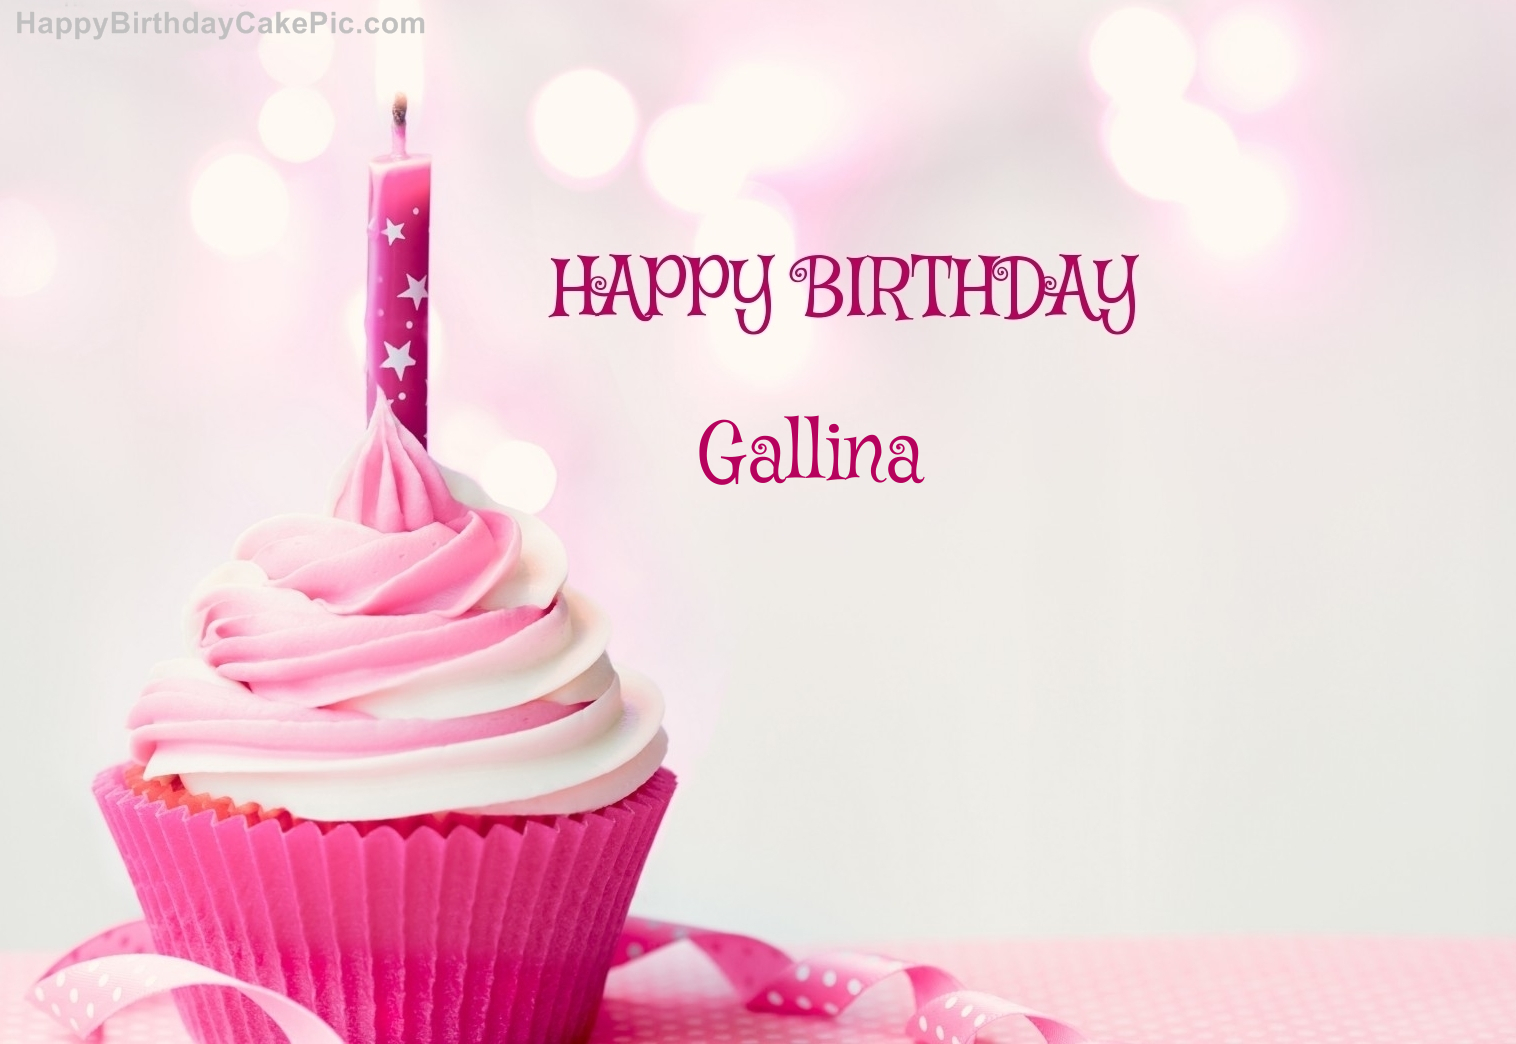 happy-birthday-cupcake-candle-pink-picture-for-Gallina.